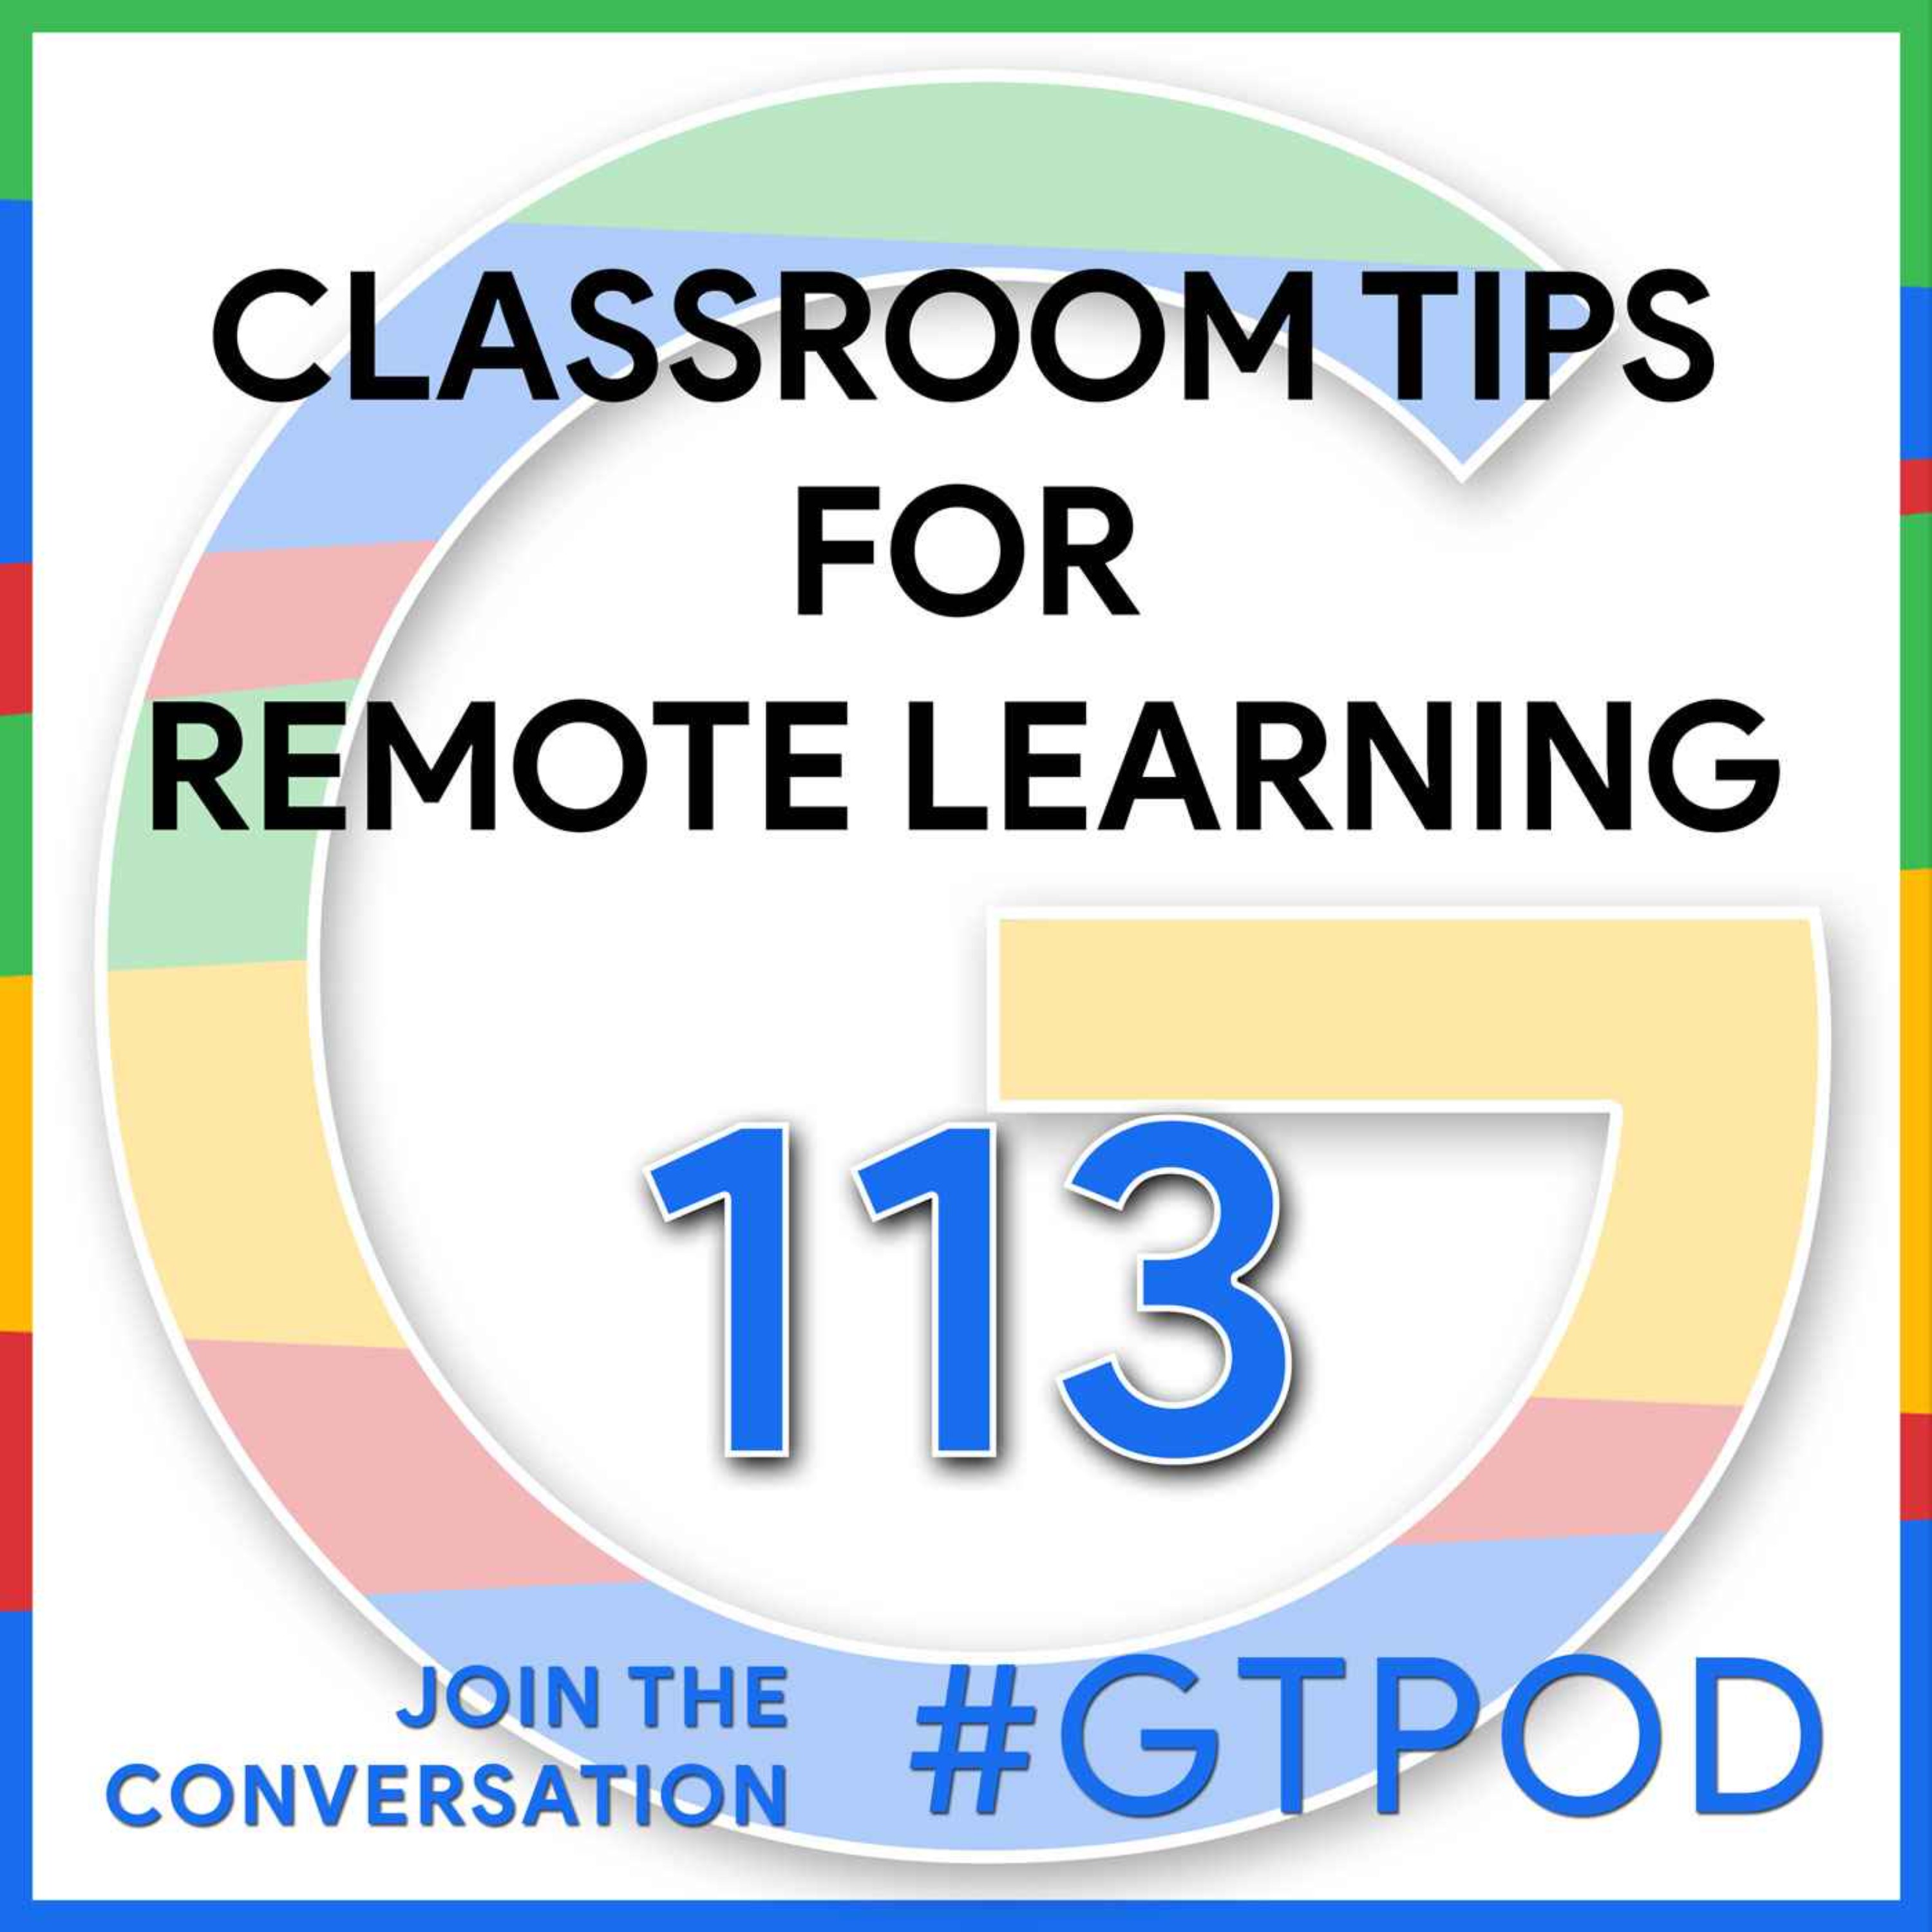 Google Classroom Tips for Remote Learning - GTP113